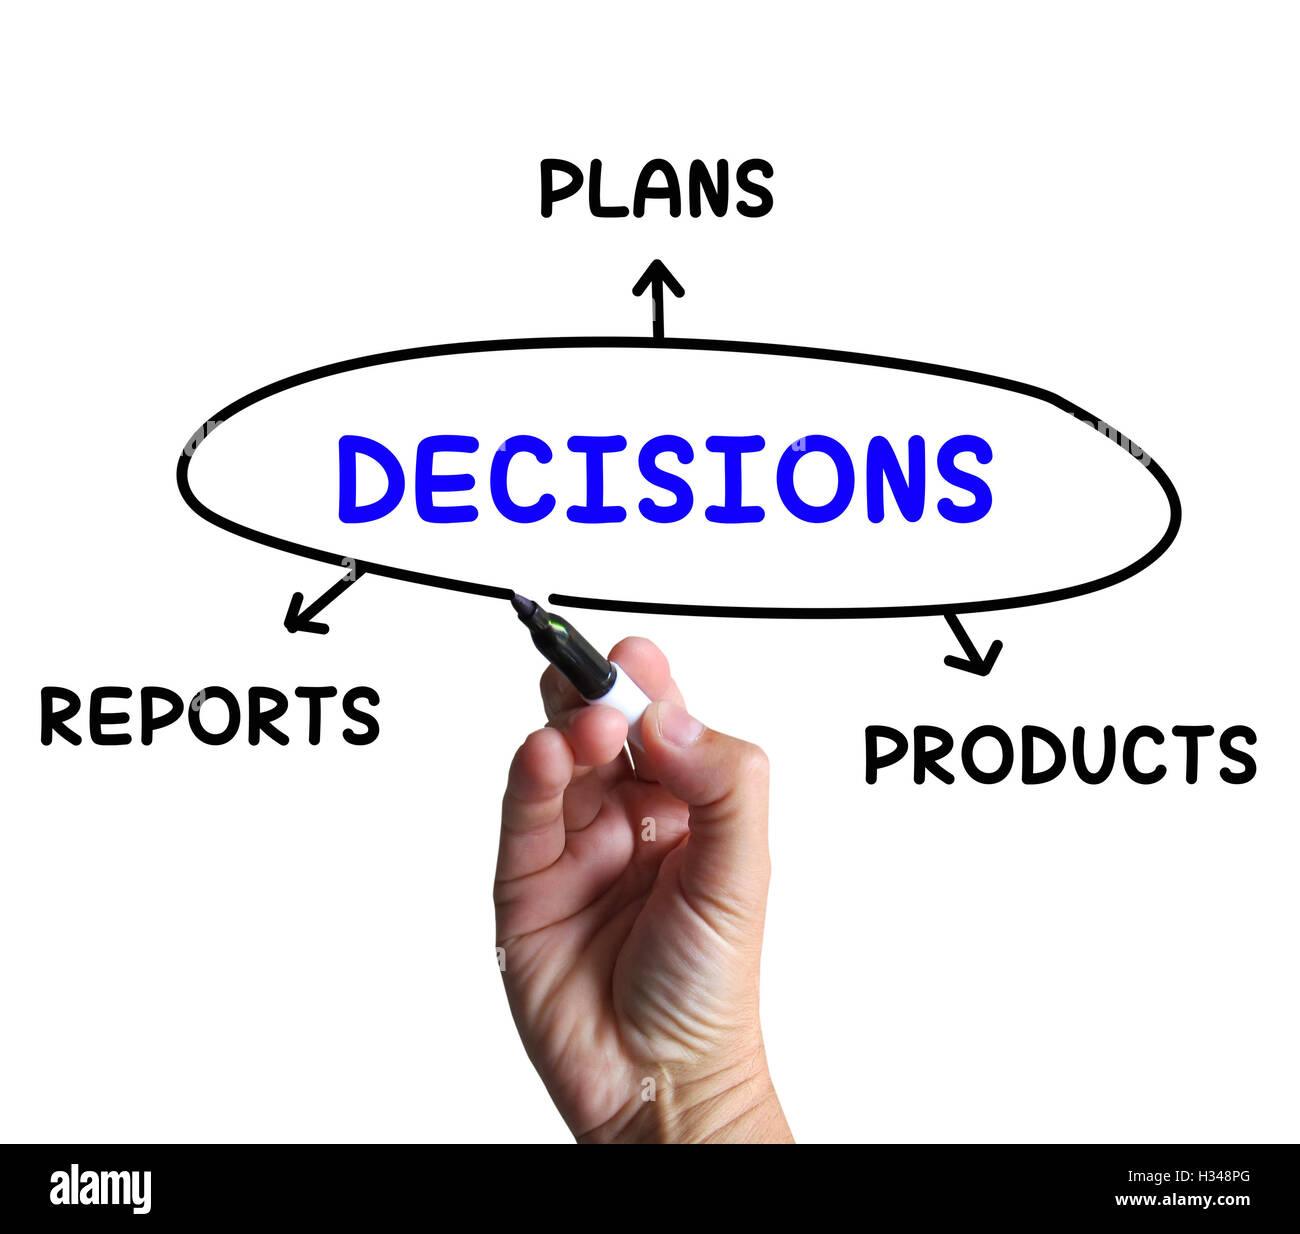 Decisions Diagram Means Reports And Deciding On Products Stock Photo